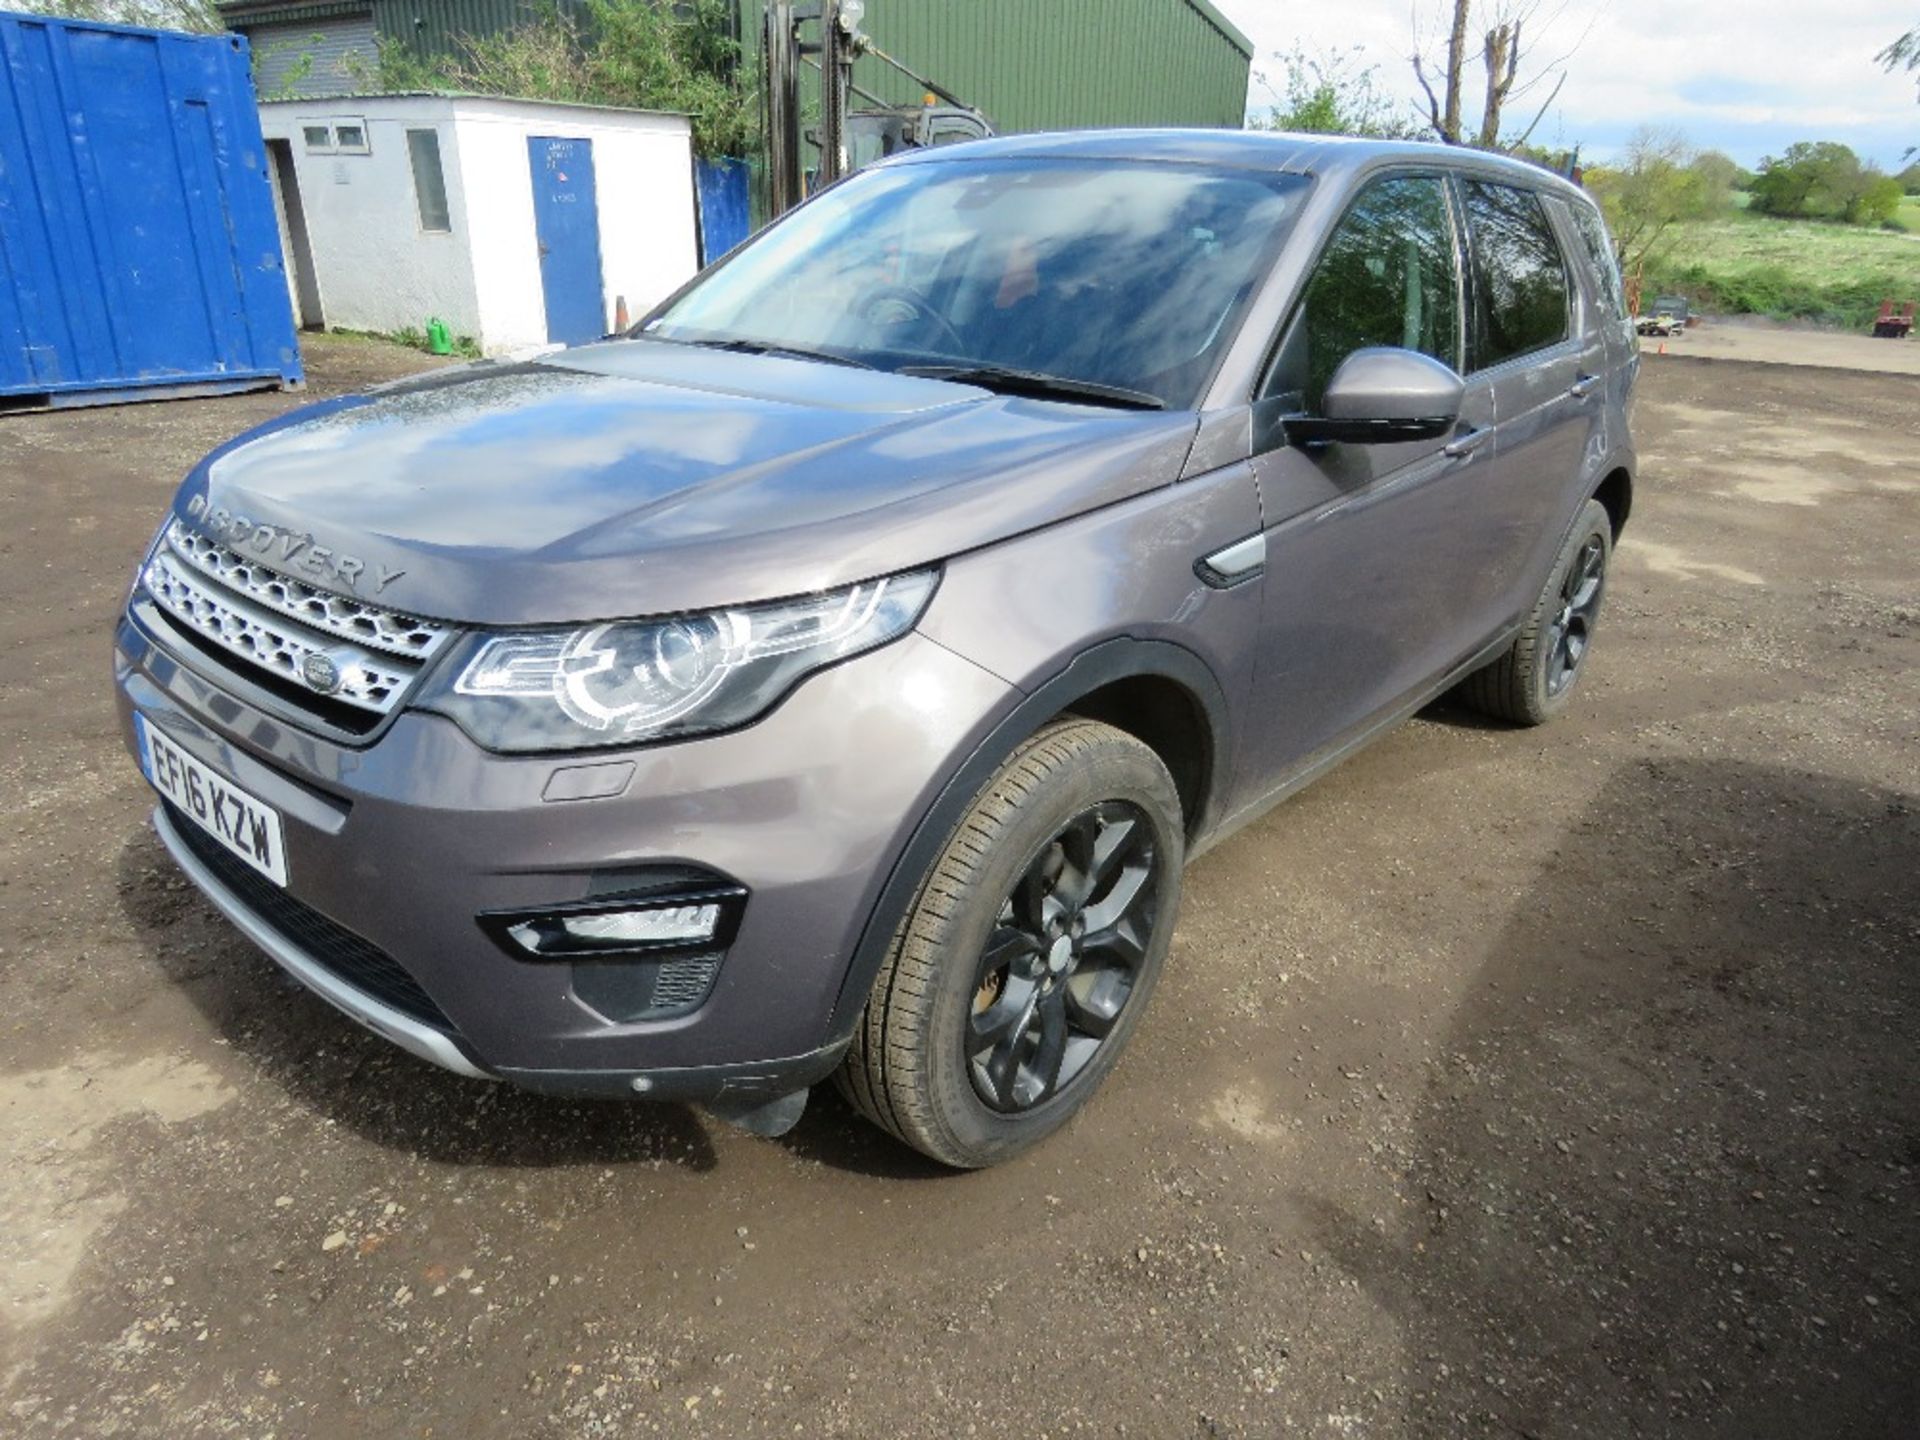 LANDROVER DISCOVERY SPORT 7 SEAT CAR REG:EF16 KZW. MOT UNTIL 8TH AUGUST 2024. WITH V5. AUTOMATIC, 2